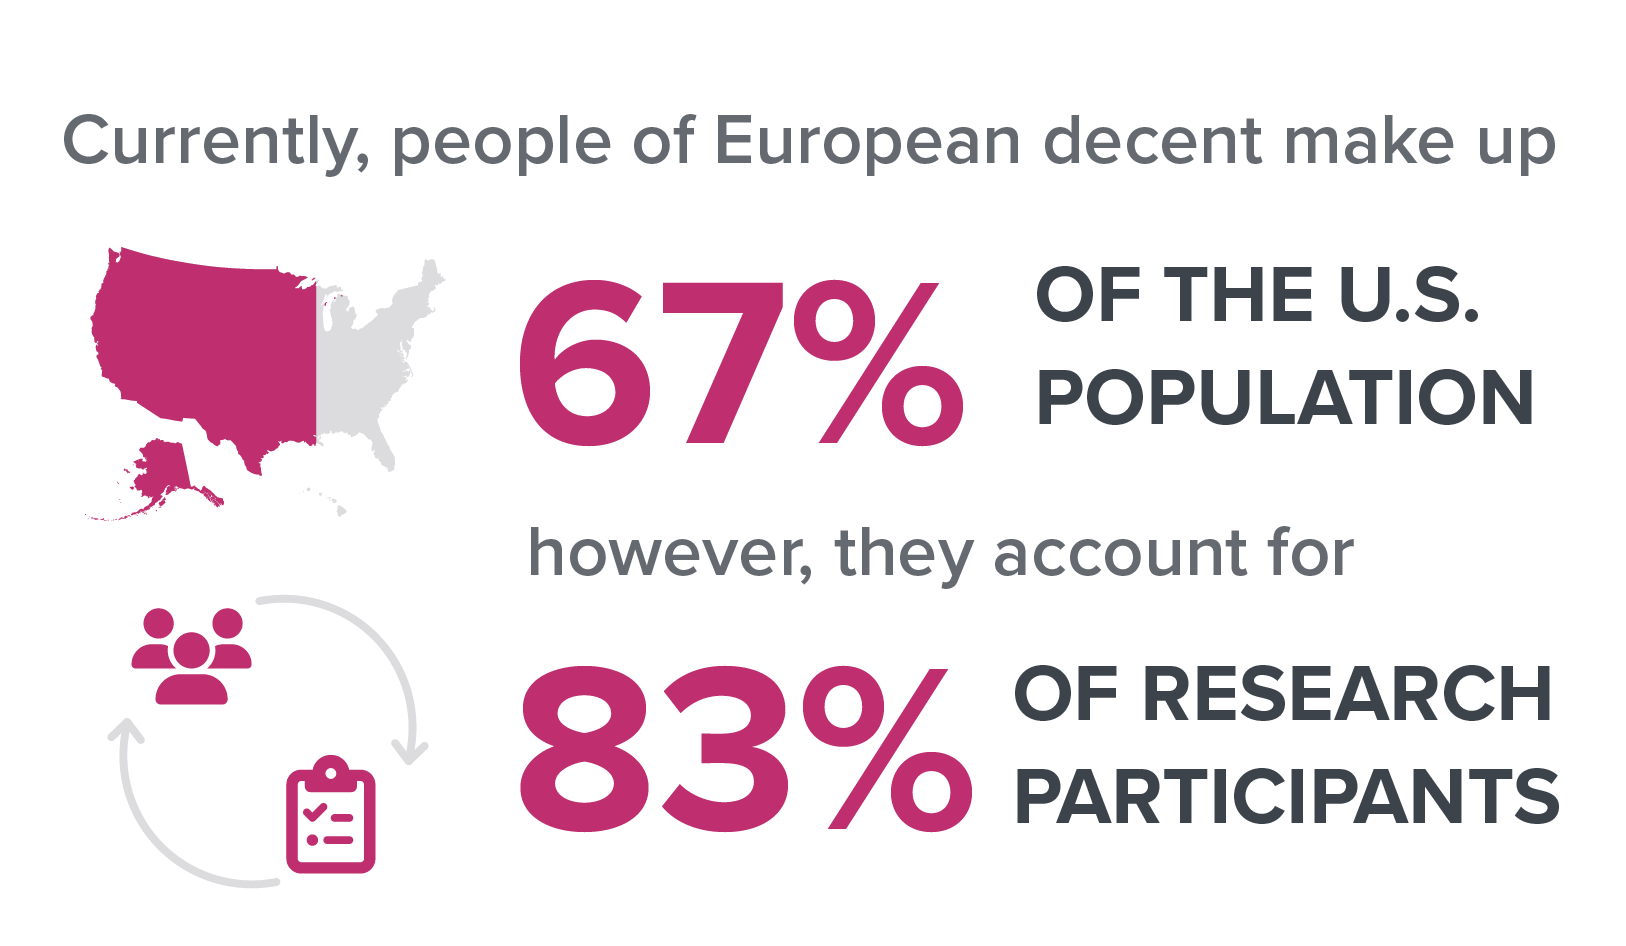 Currently, people of European decent make up 67% of the U.S. population, however, they account for 83% of research participants.